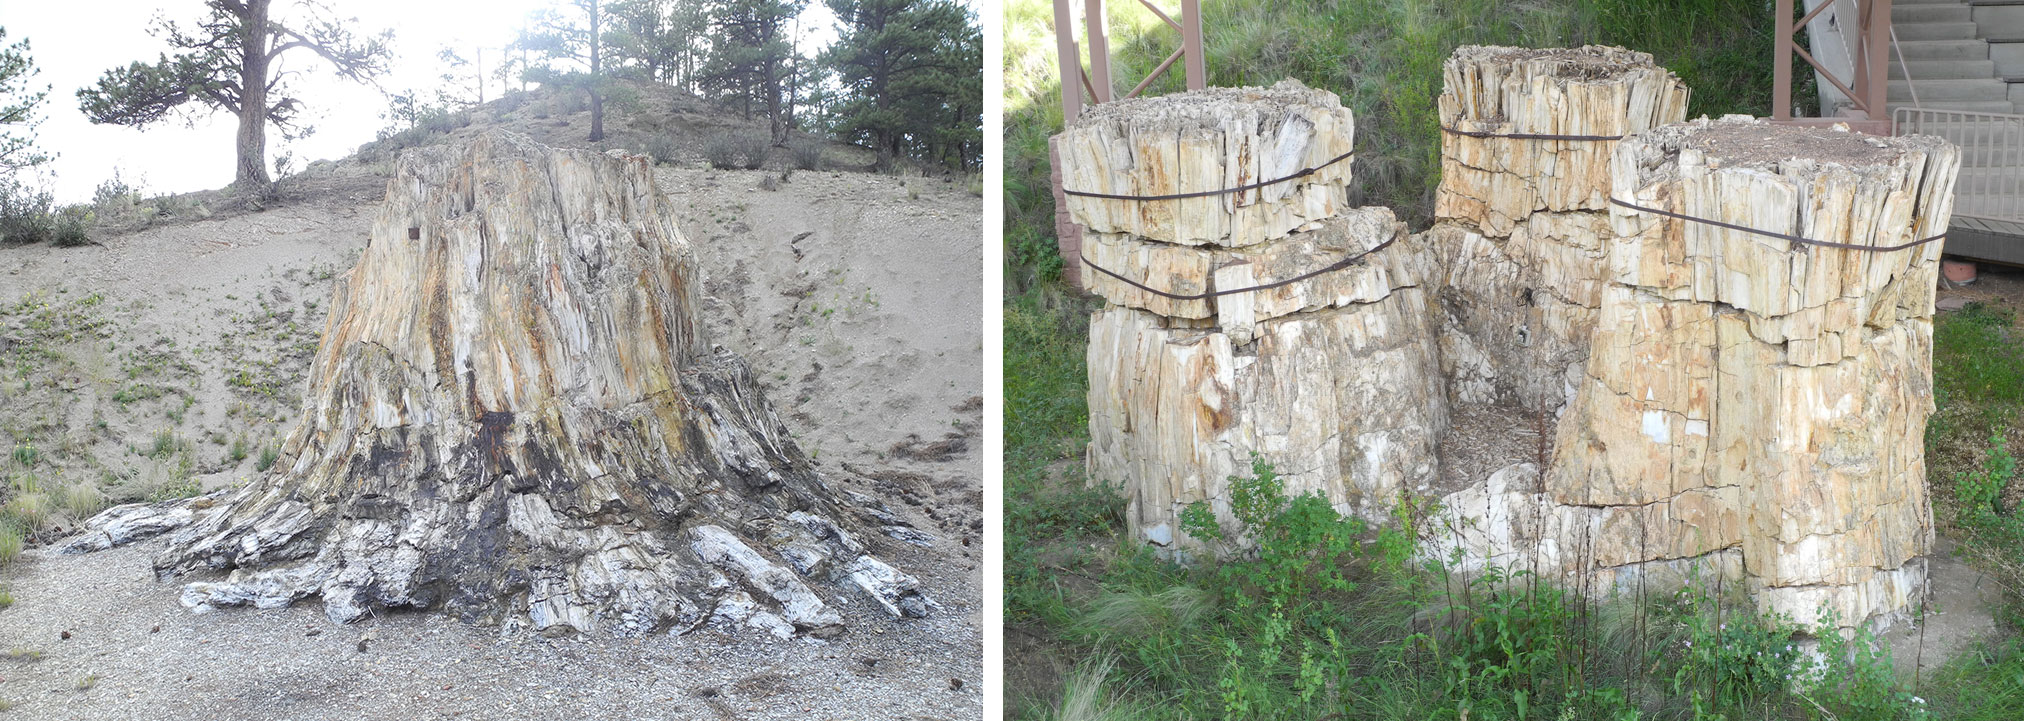 2-panel figure of fossil redwood stumps at Florissant Fossil Beds in Colorado. Panel 1: A single large stump. Panel 2: A grouping of three large stumps.